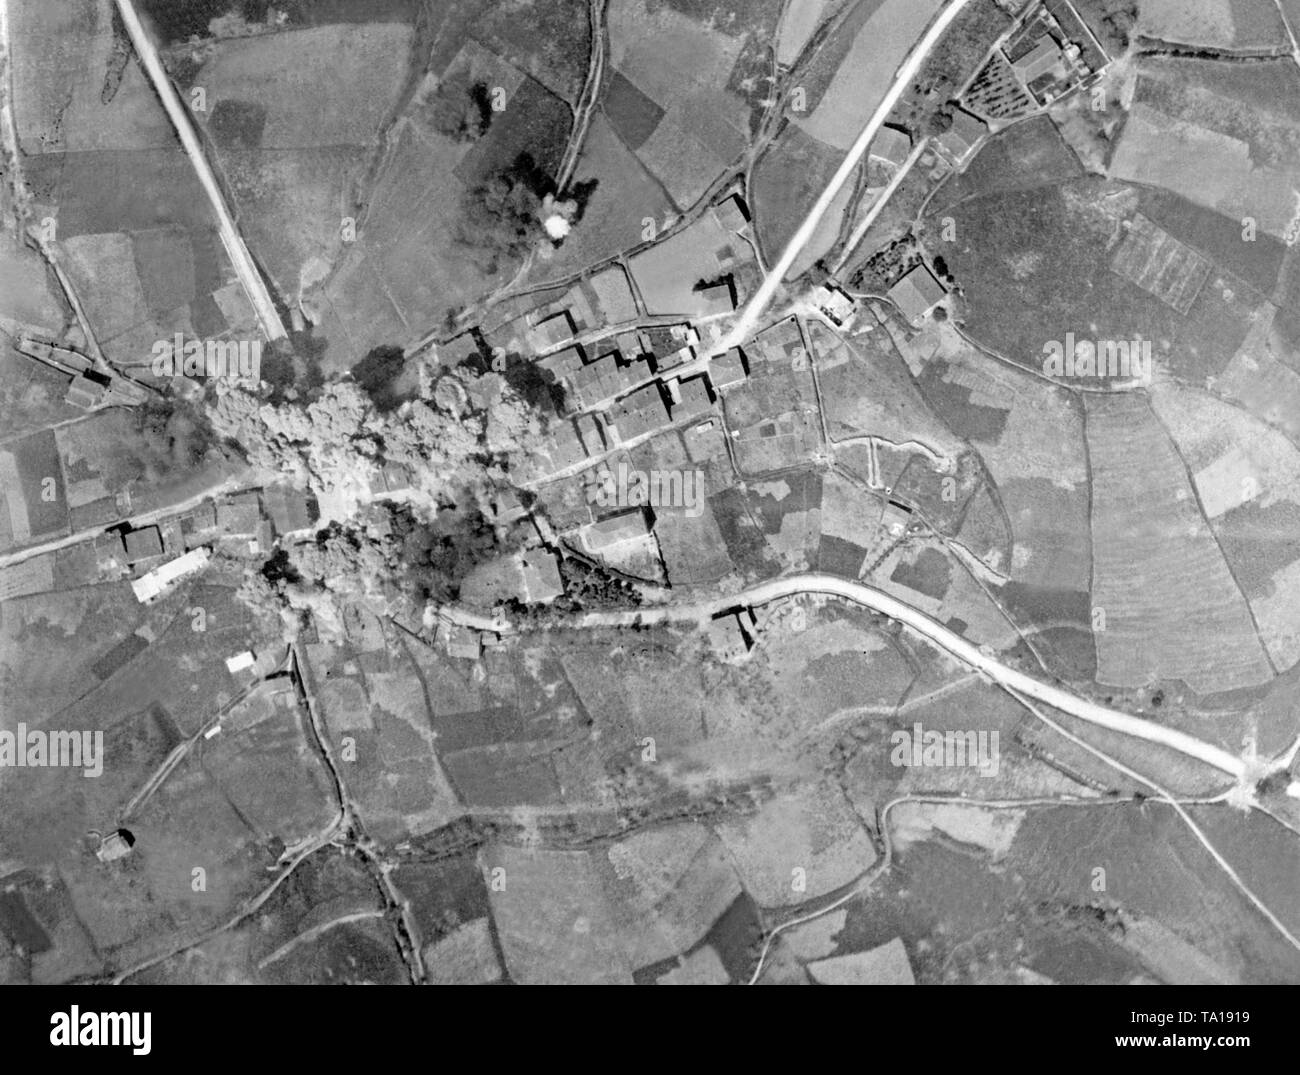 Aerial view of a bomb attack by the Italian Air Force of the Corpo Truppe Volontarie (CTV) on a village in the Spanish Civil War. Pictured, the impacts and the smoke and dust clouds of the attack. Stock Photo